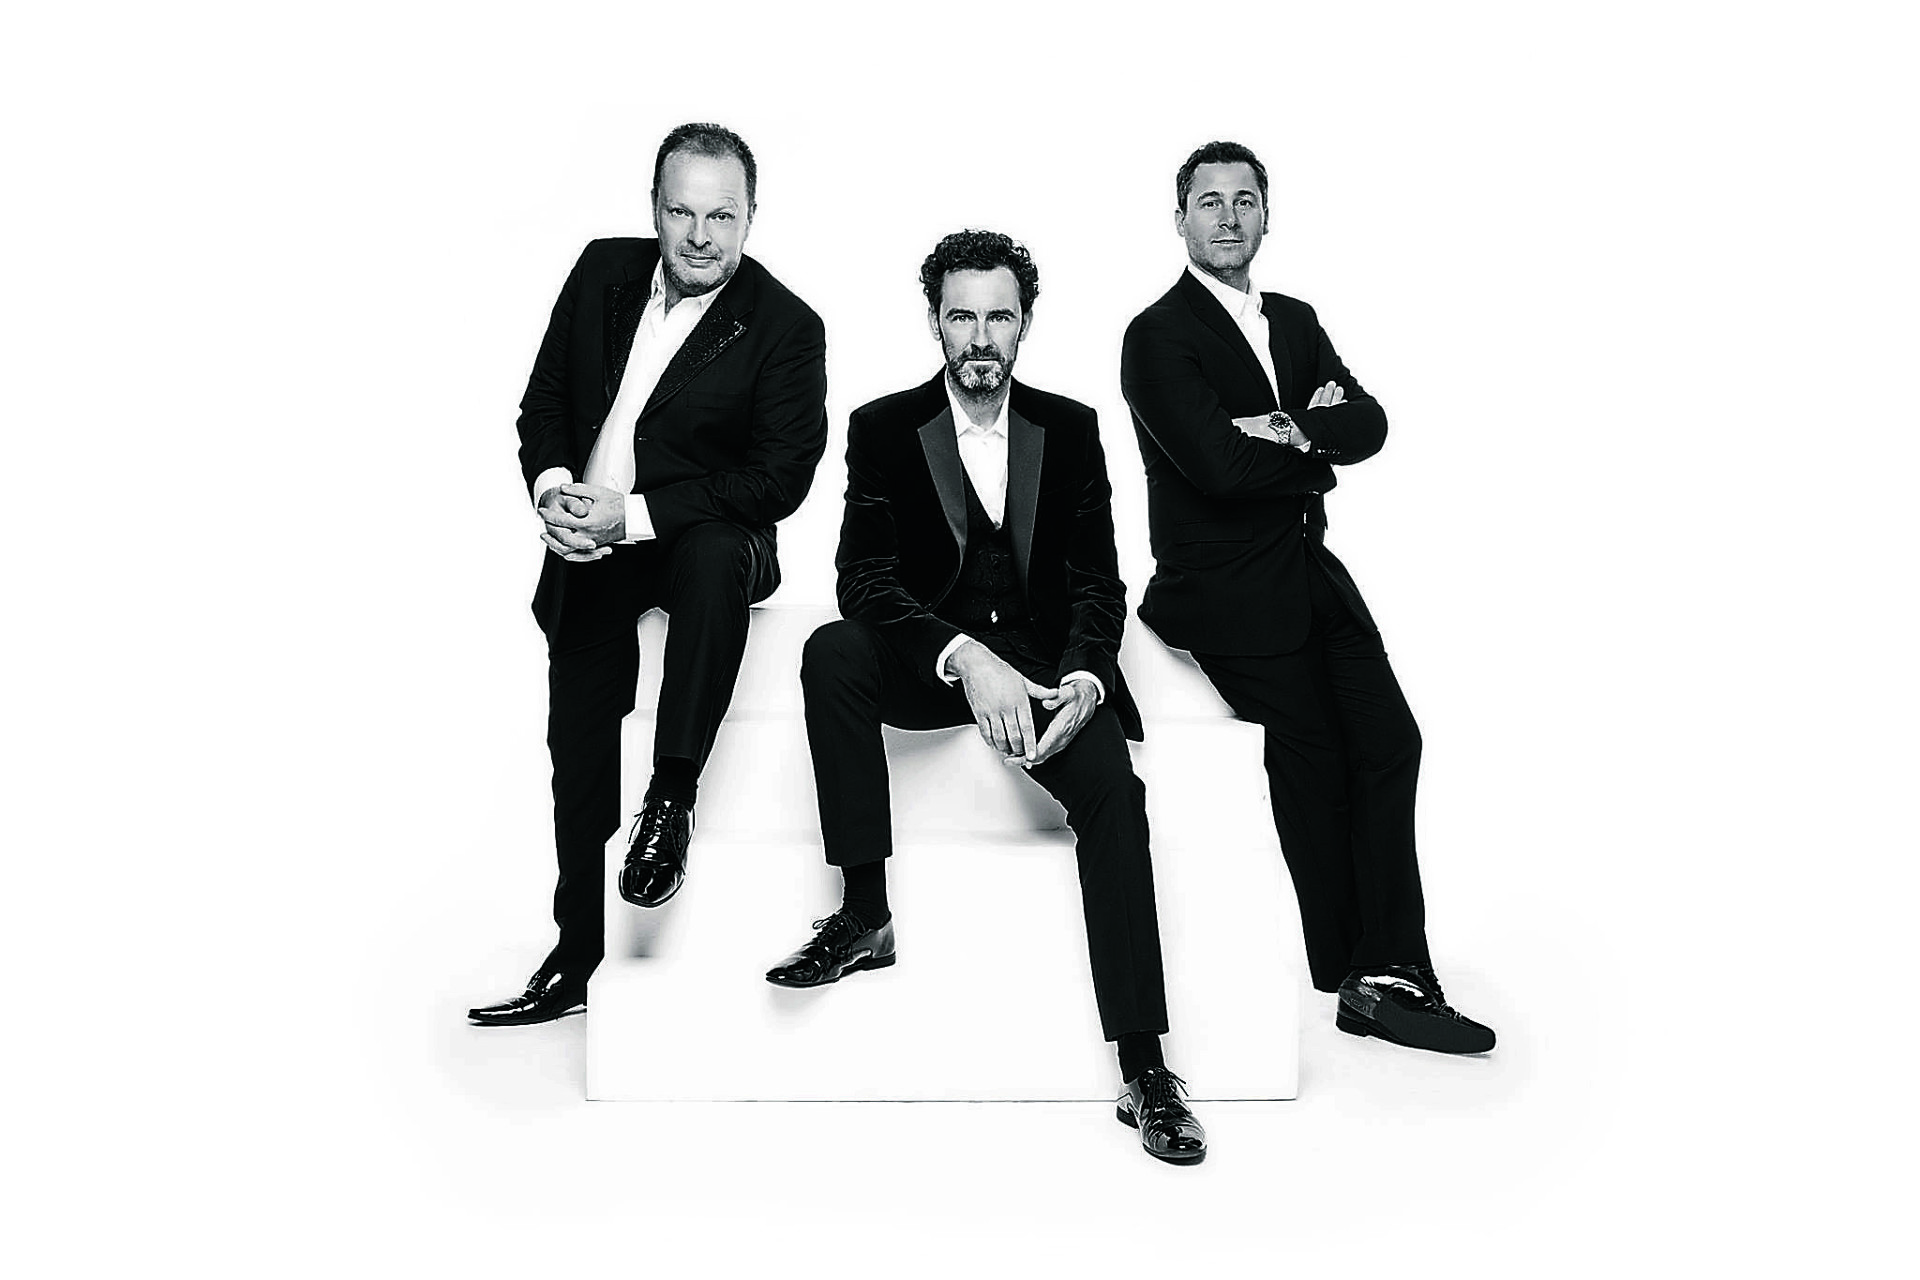 20 years of The Celtic Tenors